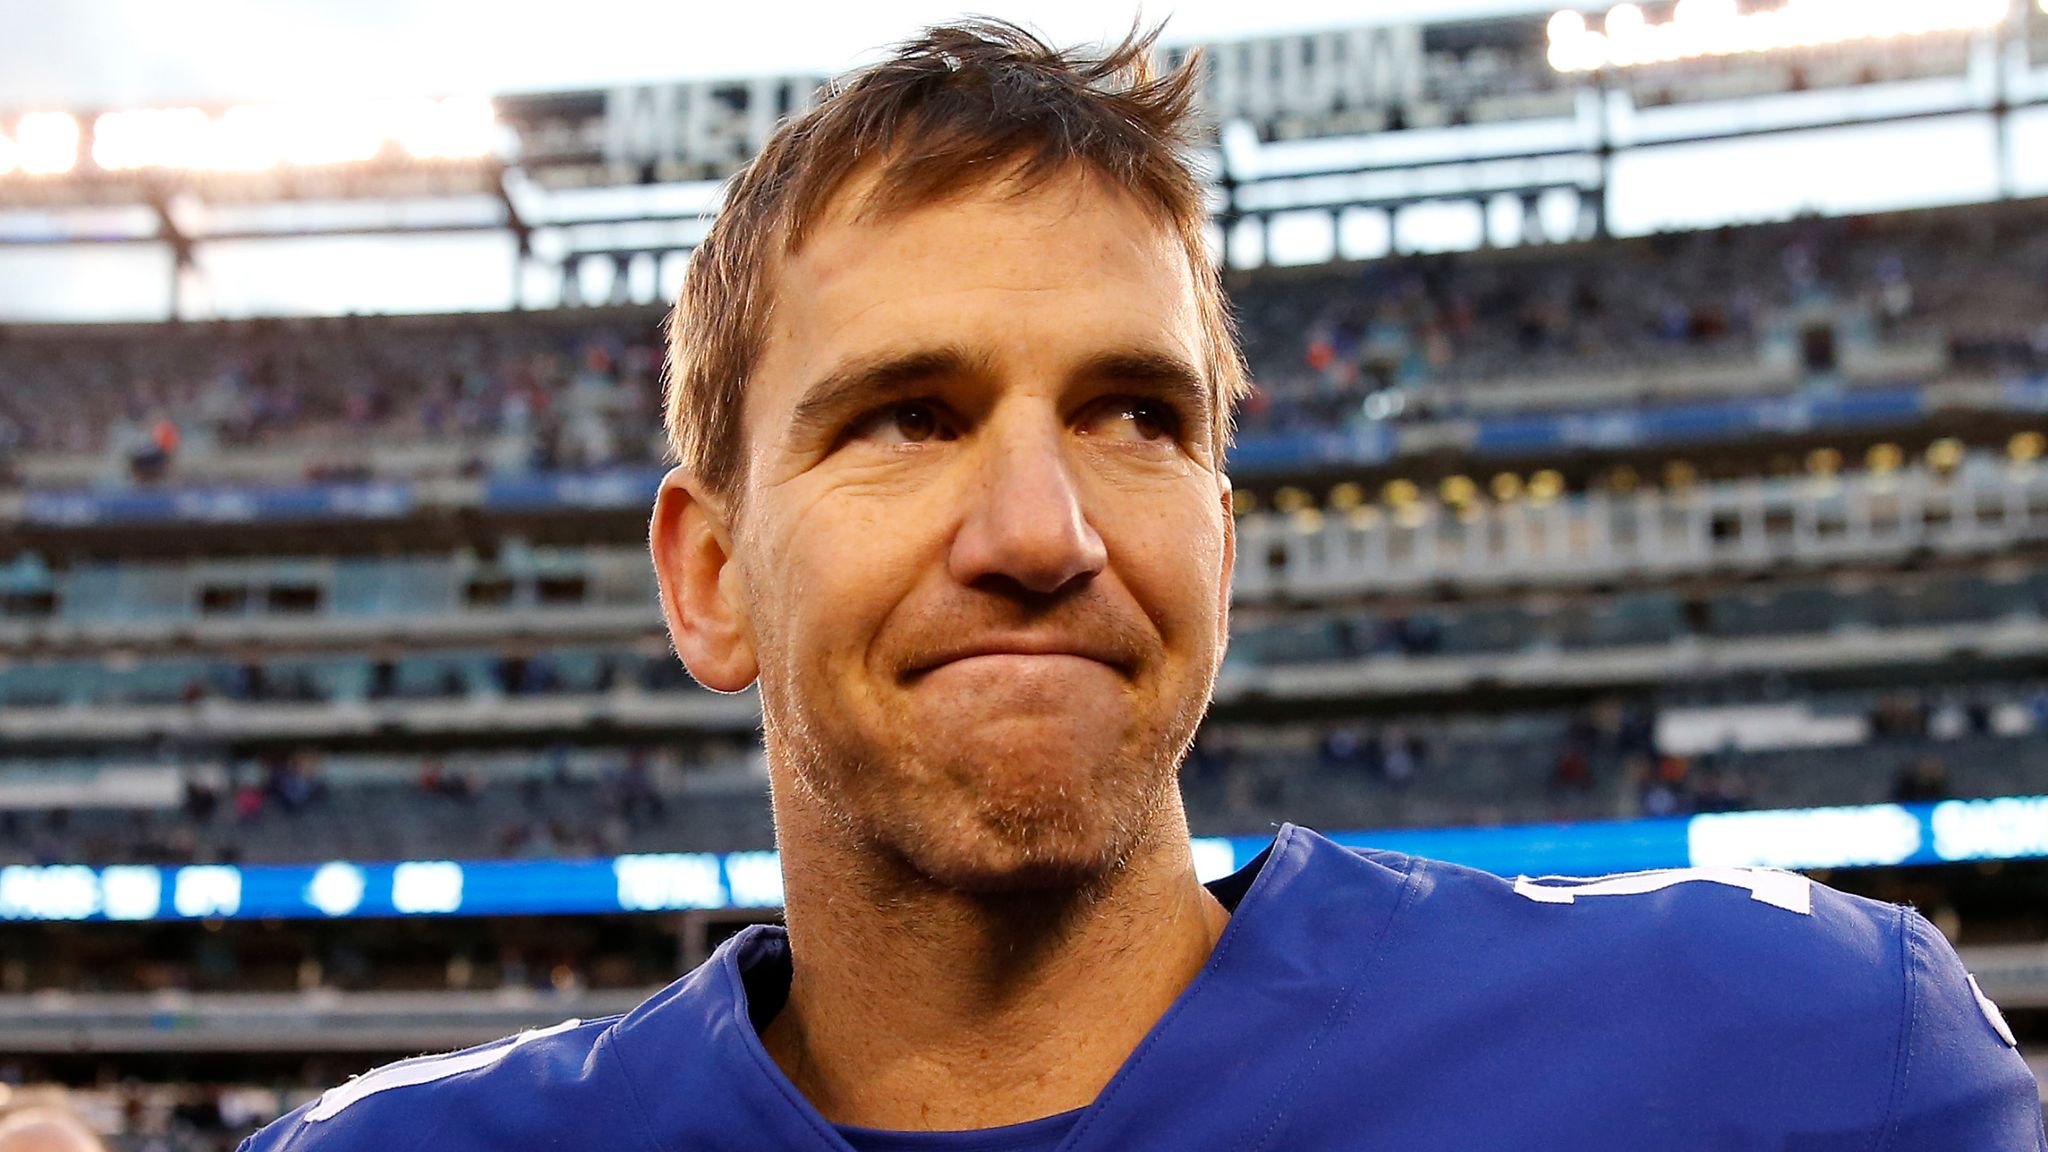 Eli Manning to retire after 16 seasons as Giants QB